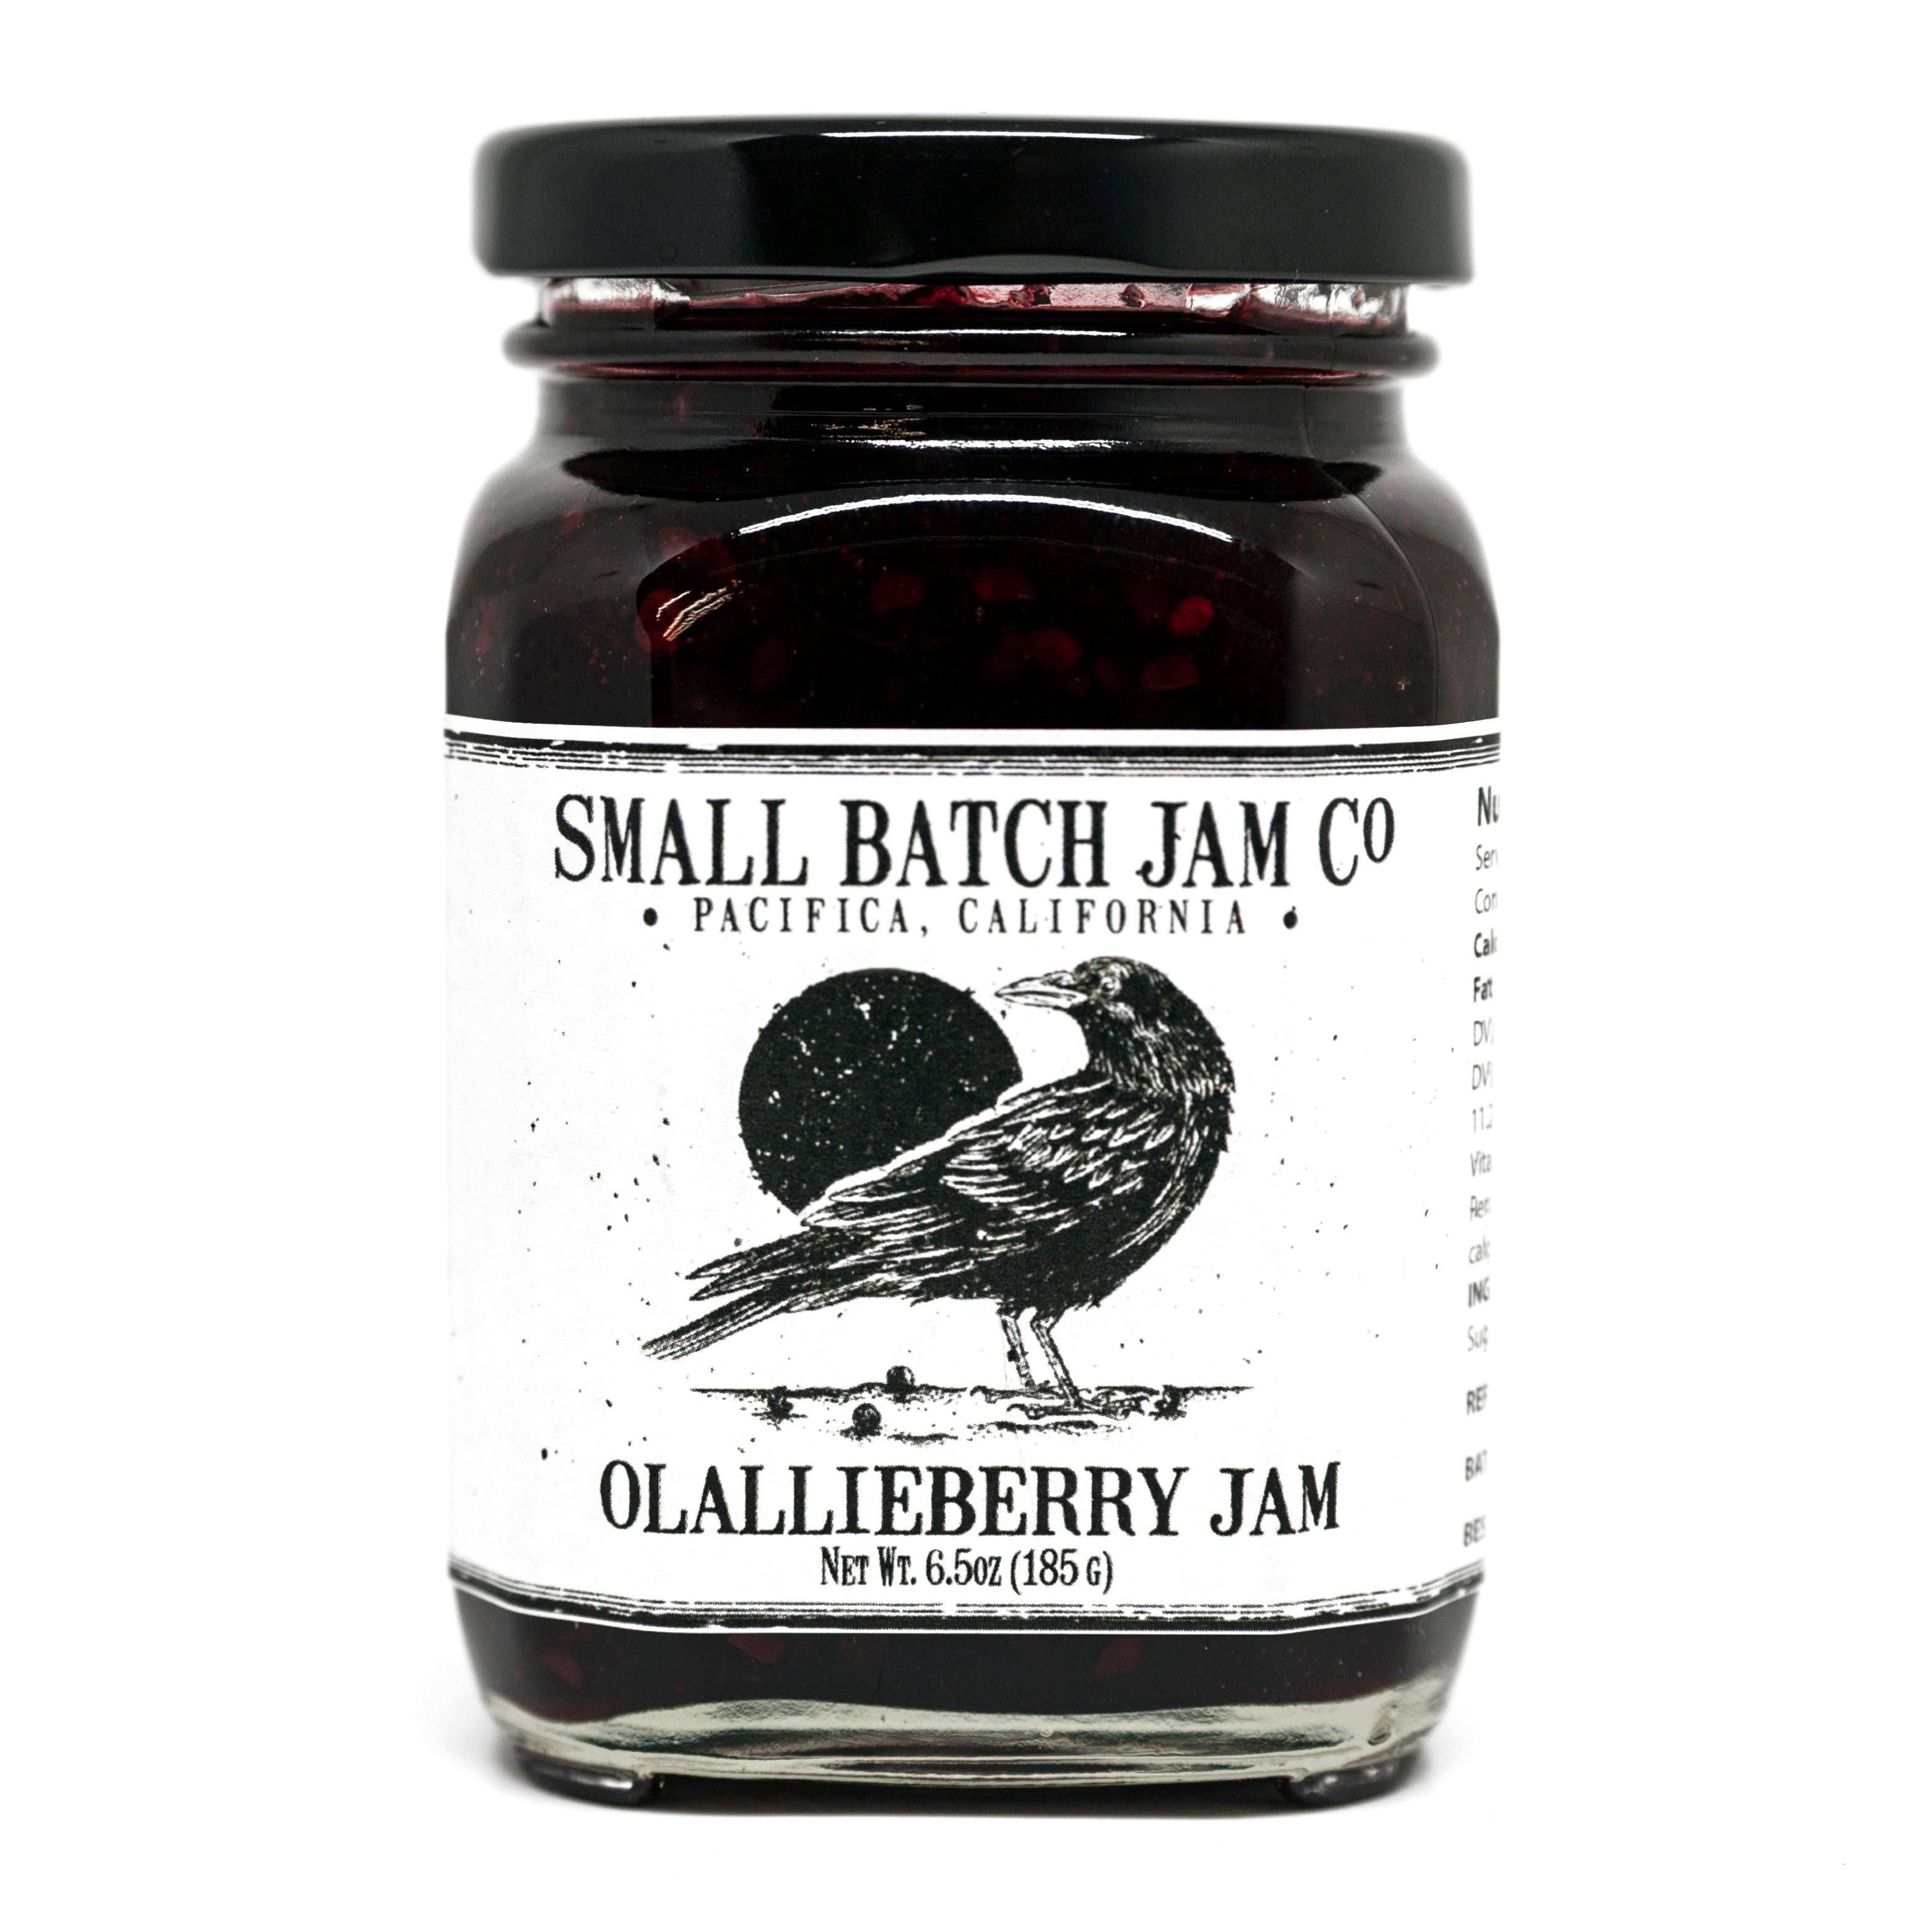 The World of The Mulberry: Silk, Stationary & Sweets - Small Batch Jam Co